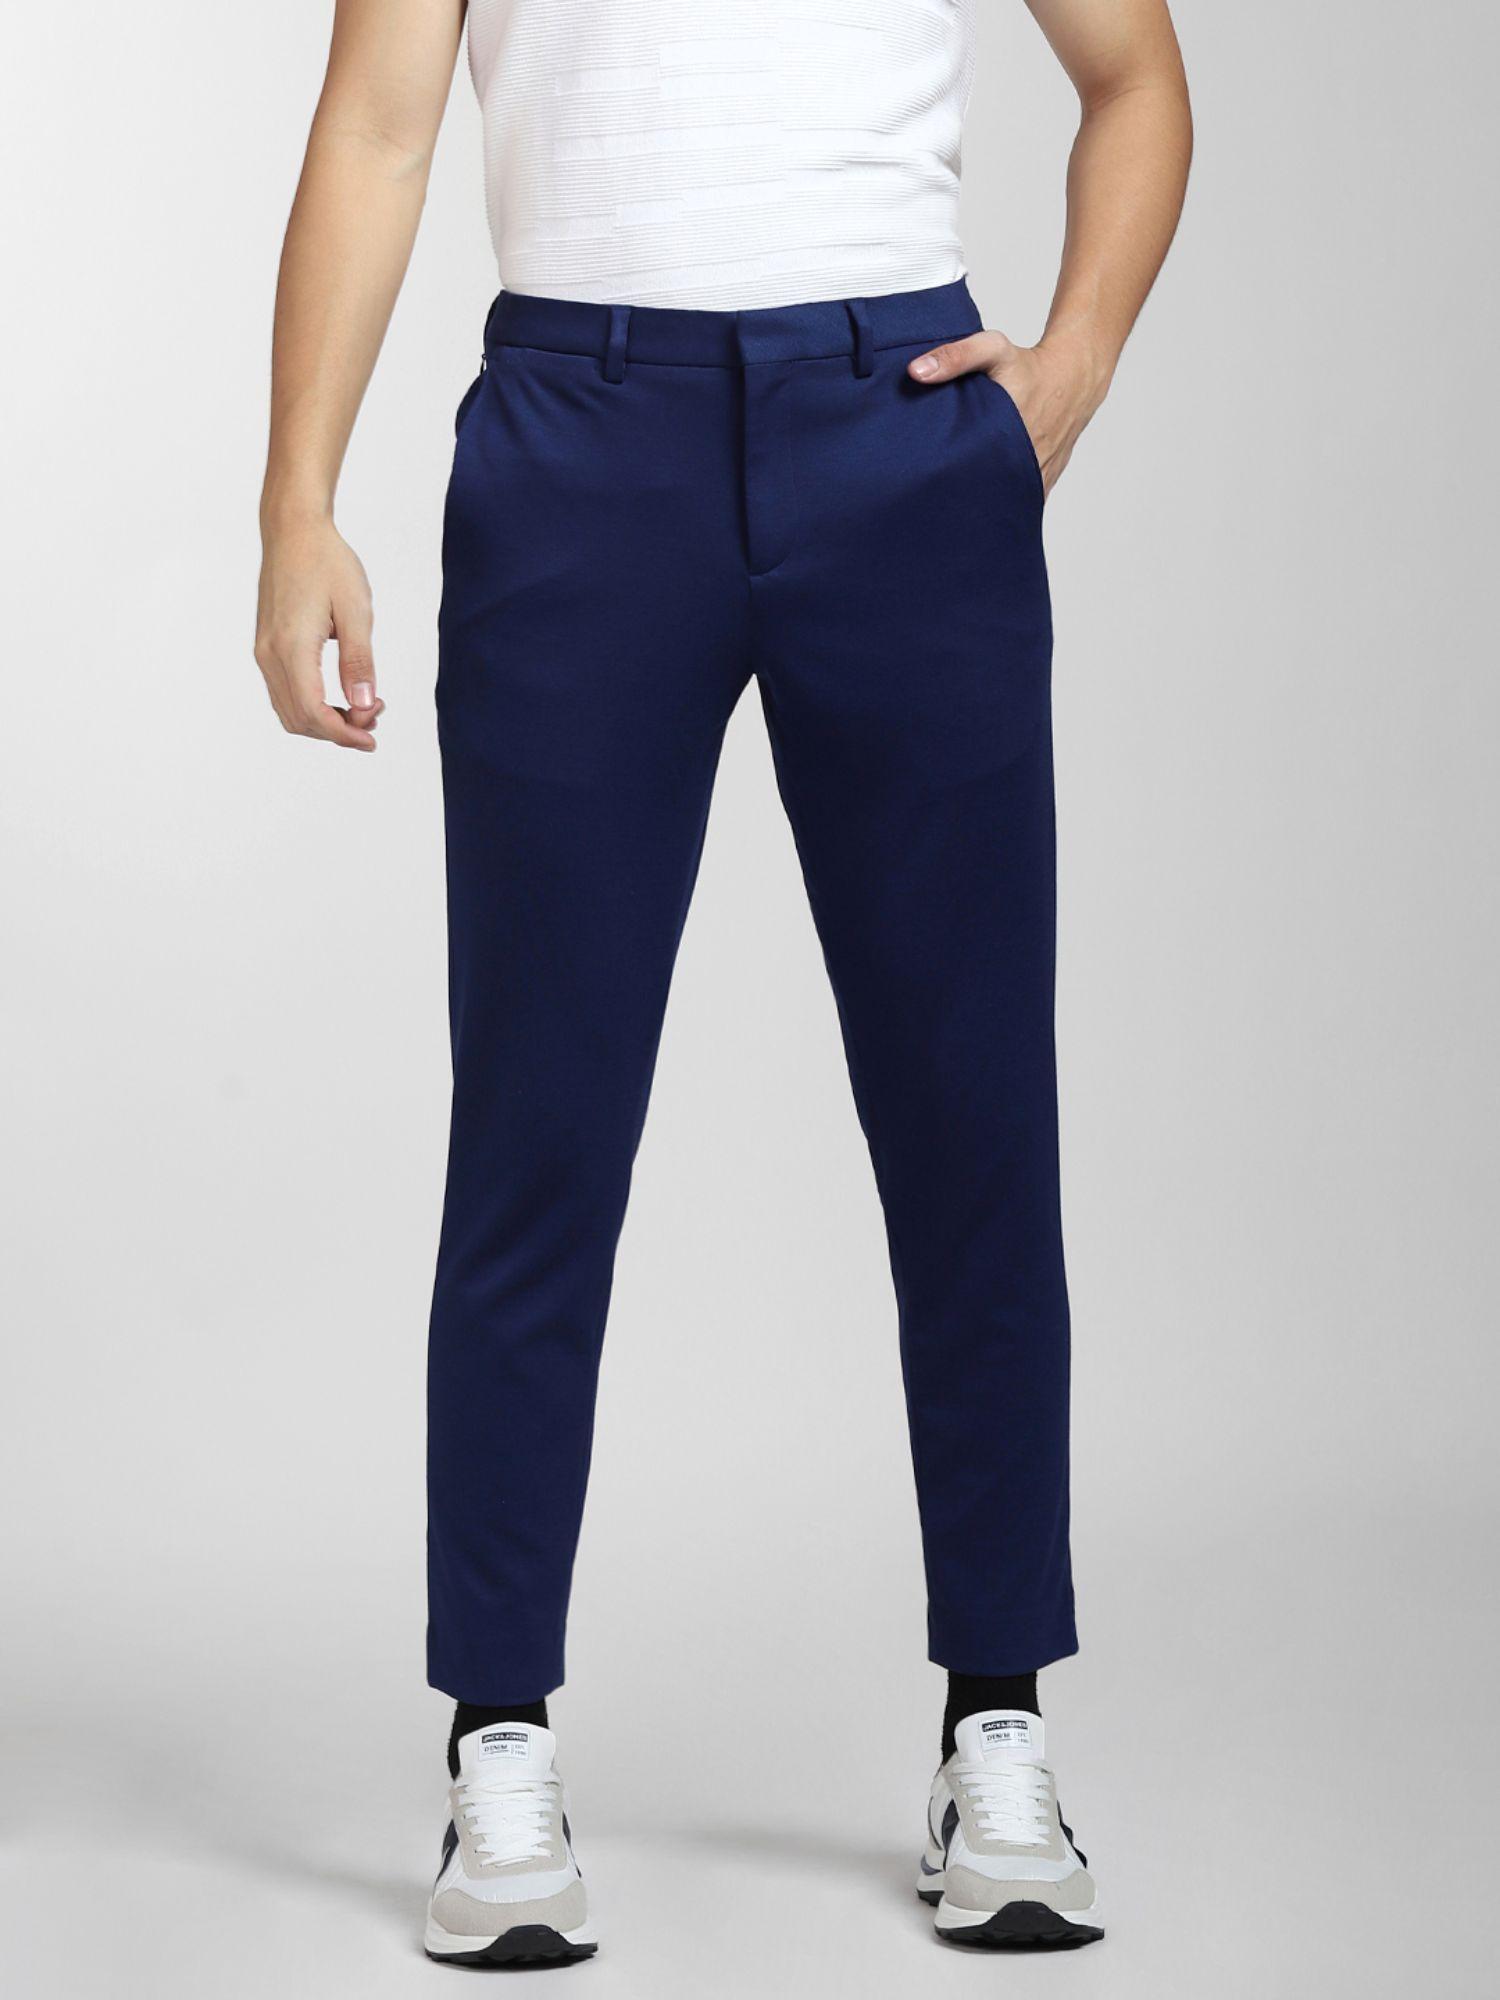 royal-blue-mid-rise-slim-fit-trousers